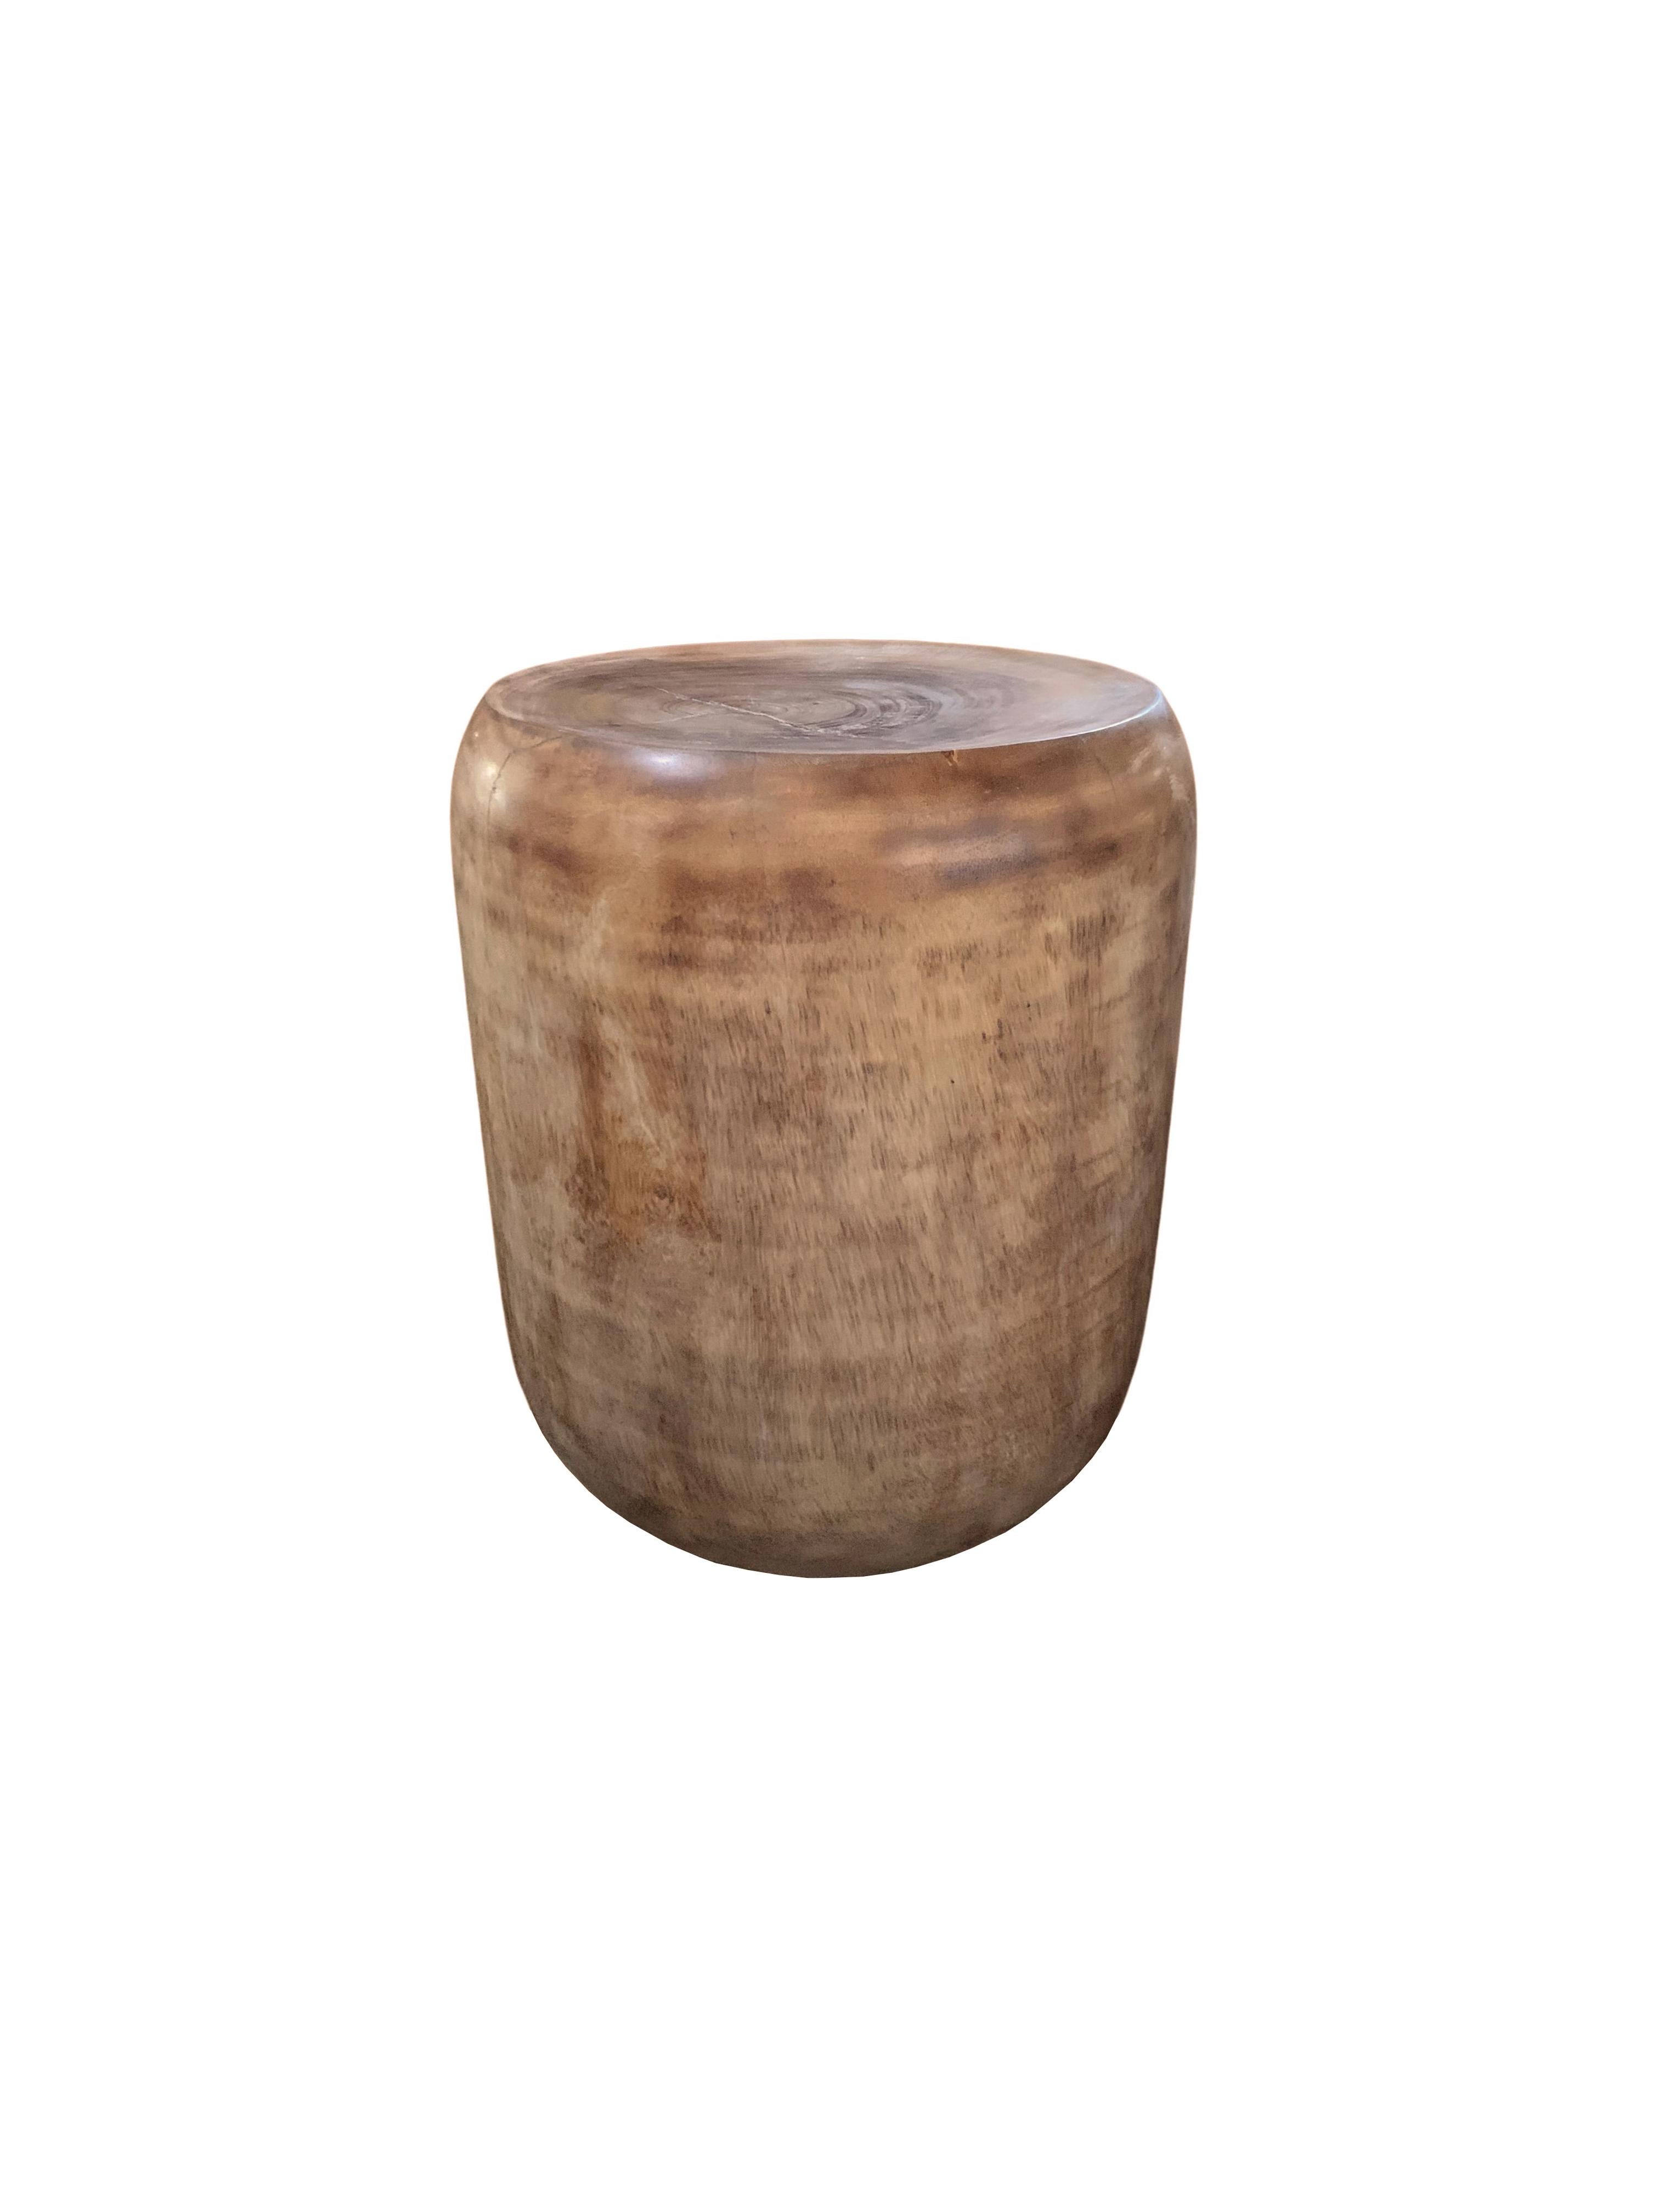 A wonderfully sculptural round side table or stool. Its neutral pigment makes it perfect for any space. A uniquely sculptural and versatile piece certain to invoke conversation. It was crafted from a solid block of mango wood and has a smooth